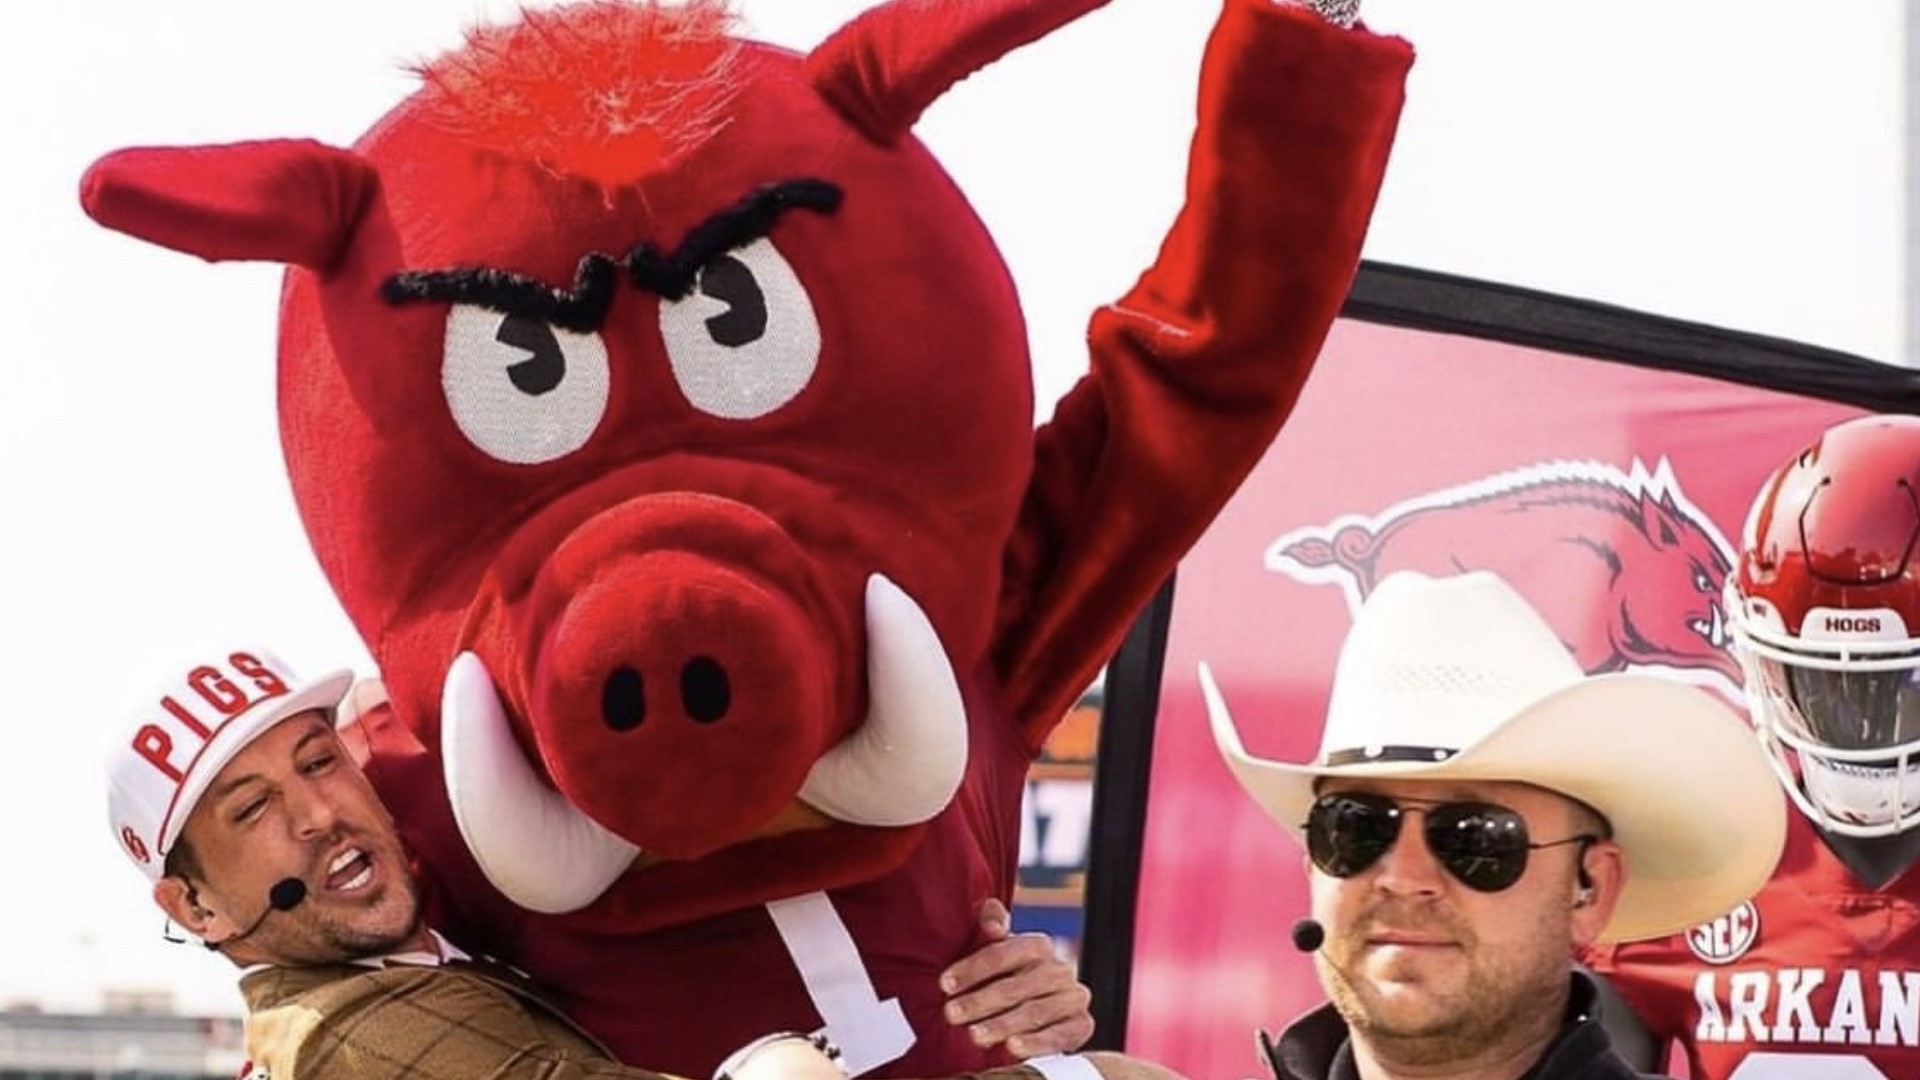 Hats widely seen at sporting events have garnered a lot of attention as fans, athletes, and hog icons wear Pigs Brand.